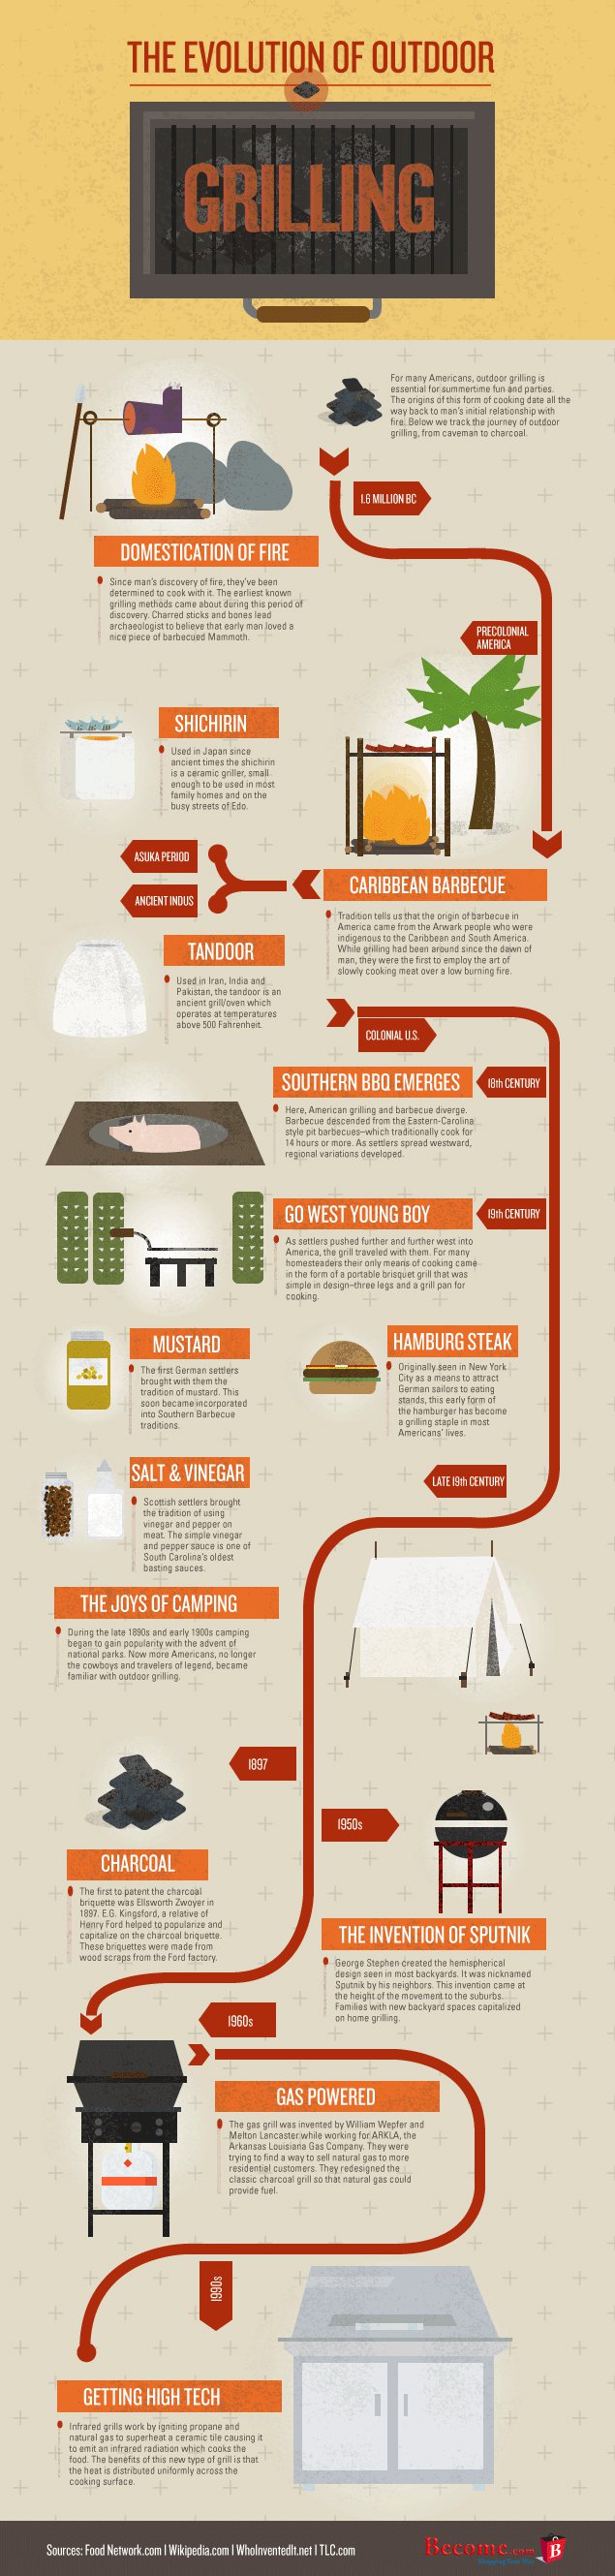 Infographic-The-evolution-of-outdoor-grilling